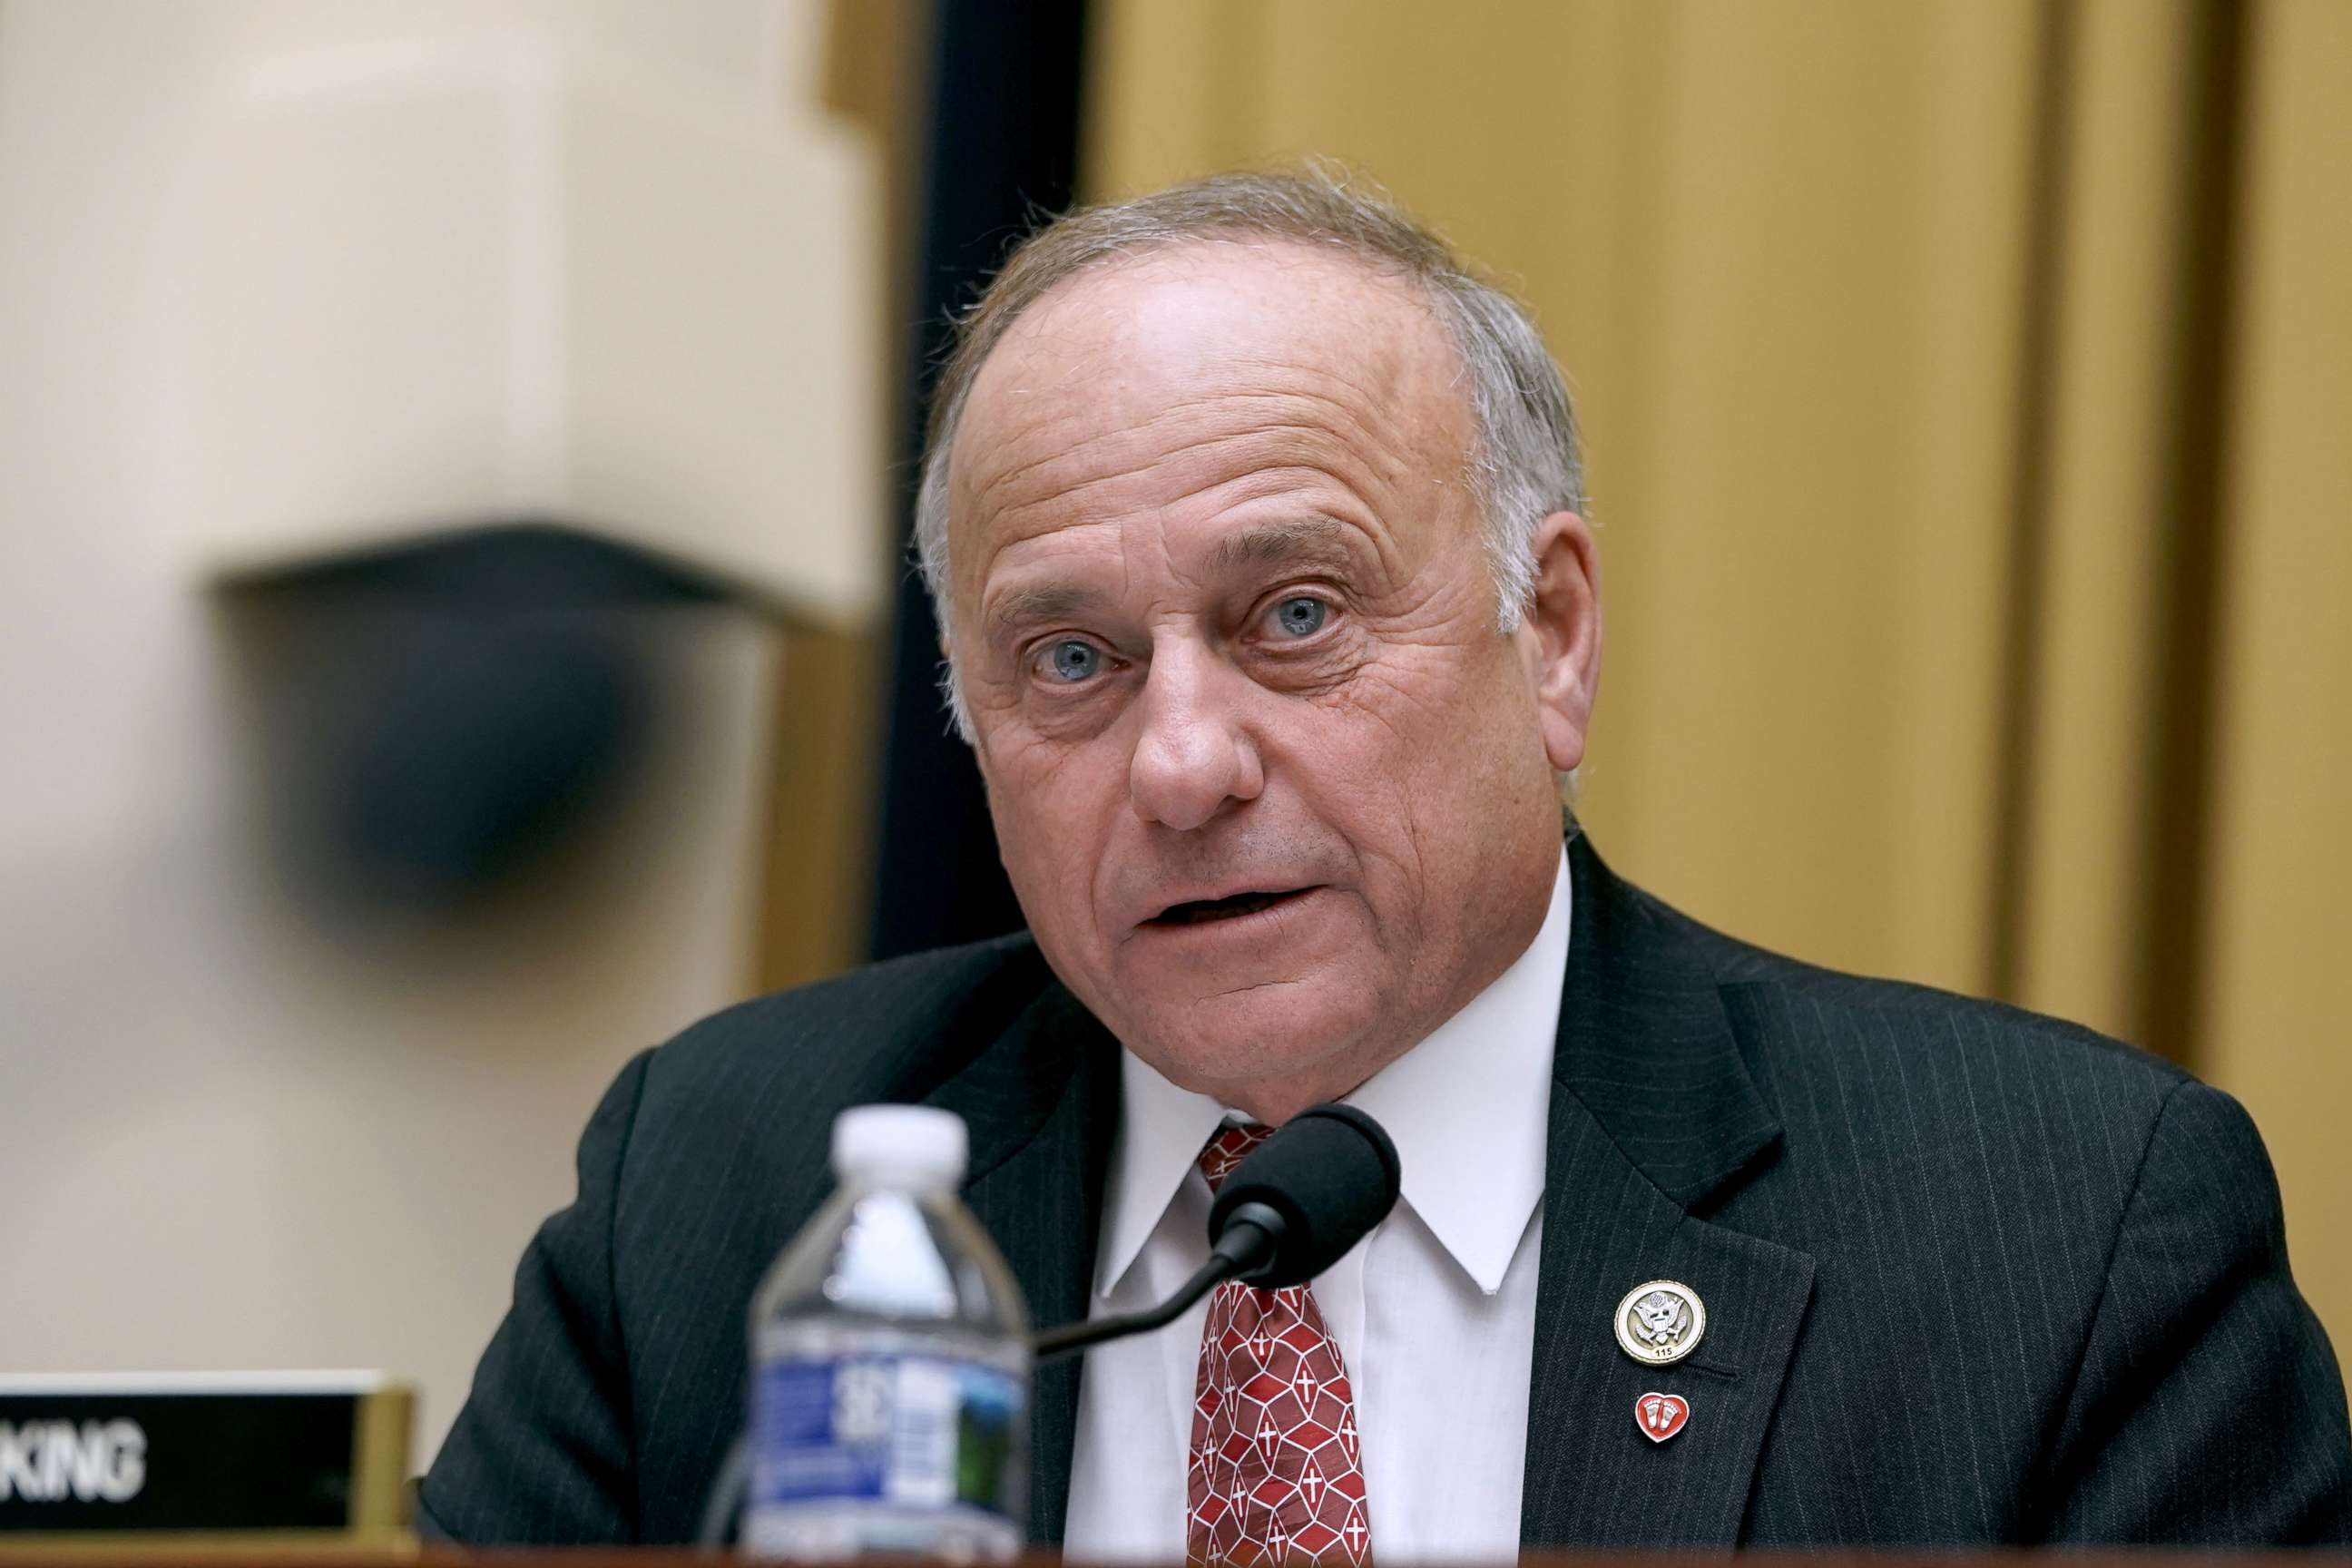 PHOTO: Rep. Steve King speaks during a hearing before the House Judiciary Committee, Dec. 11, 2018 in Washington, DC.